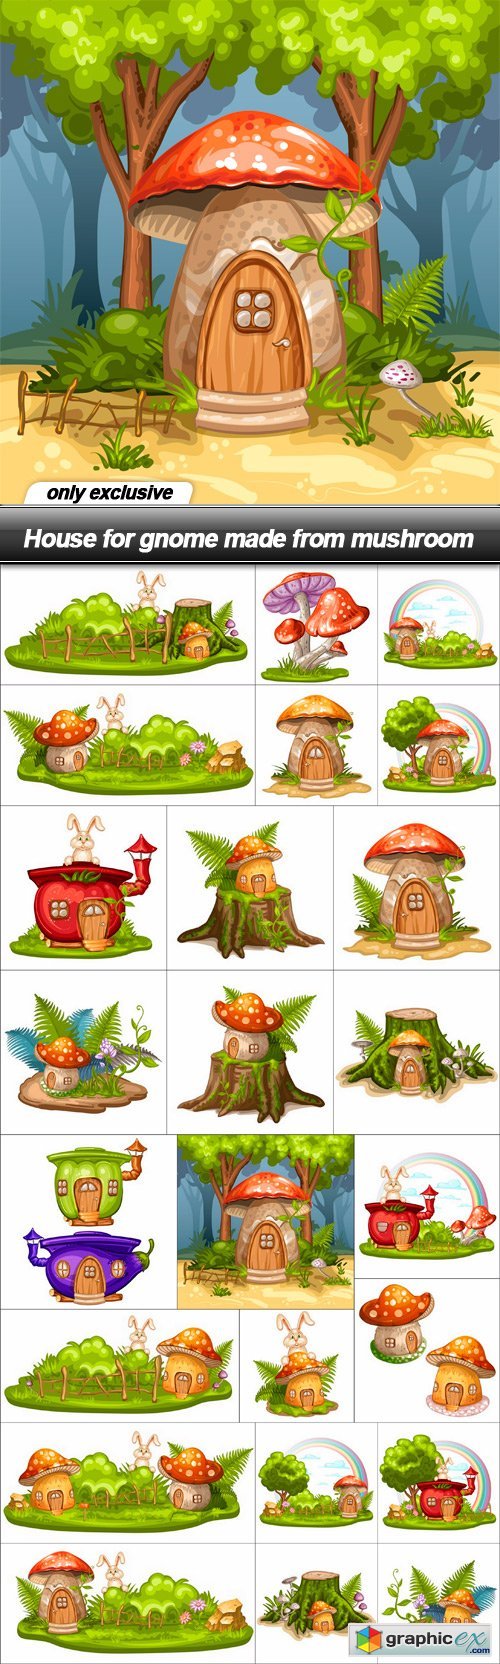 House for gnome made from mushroom - 24 EPS